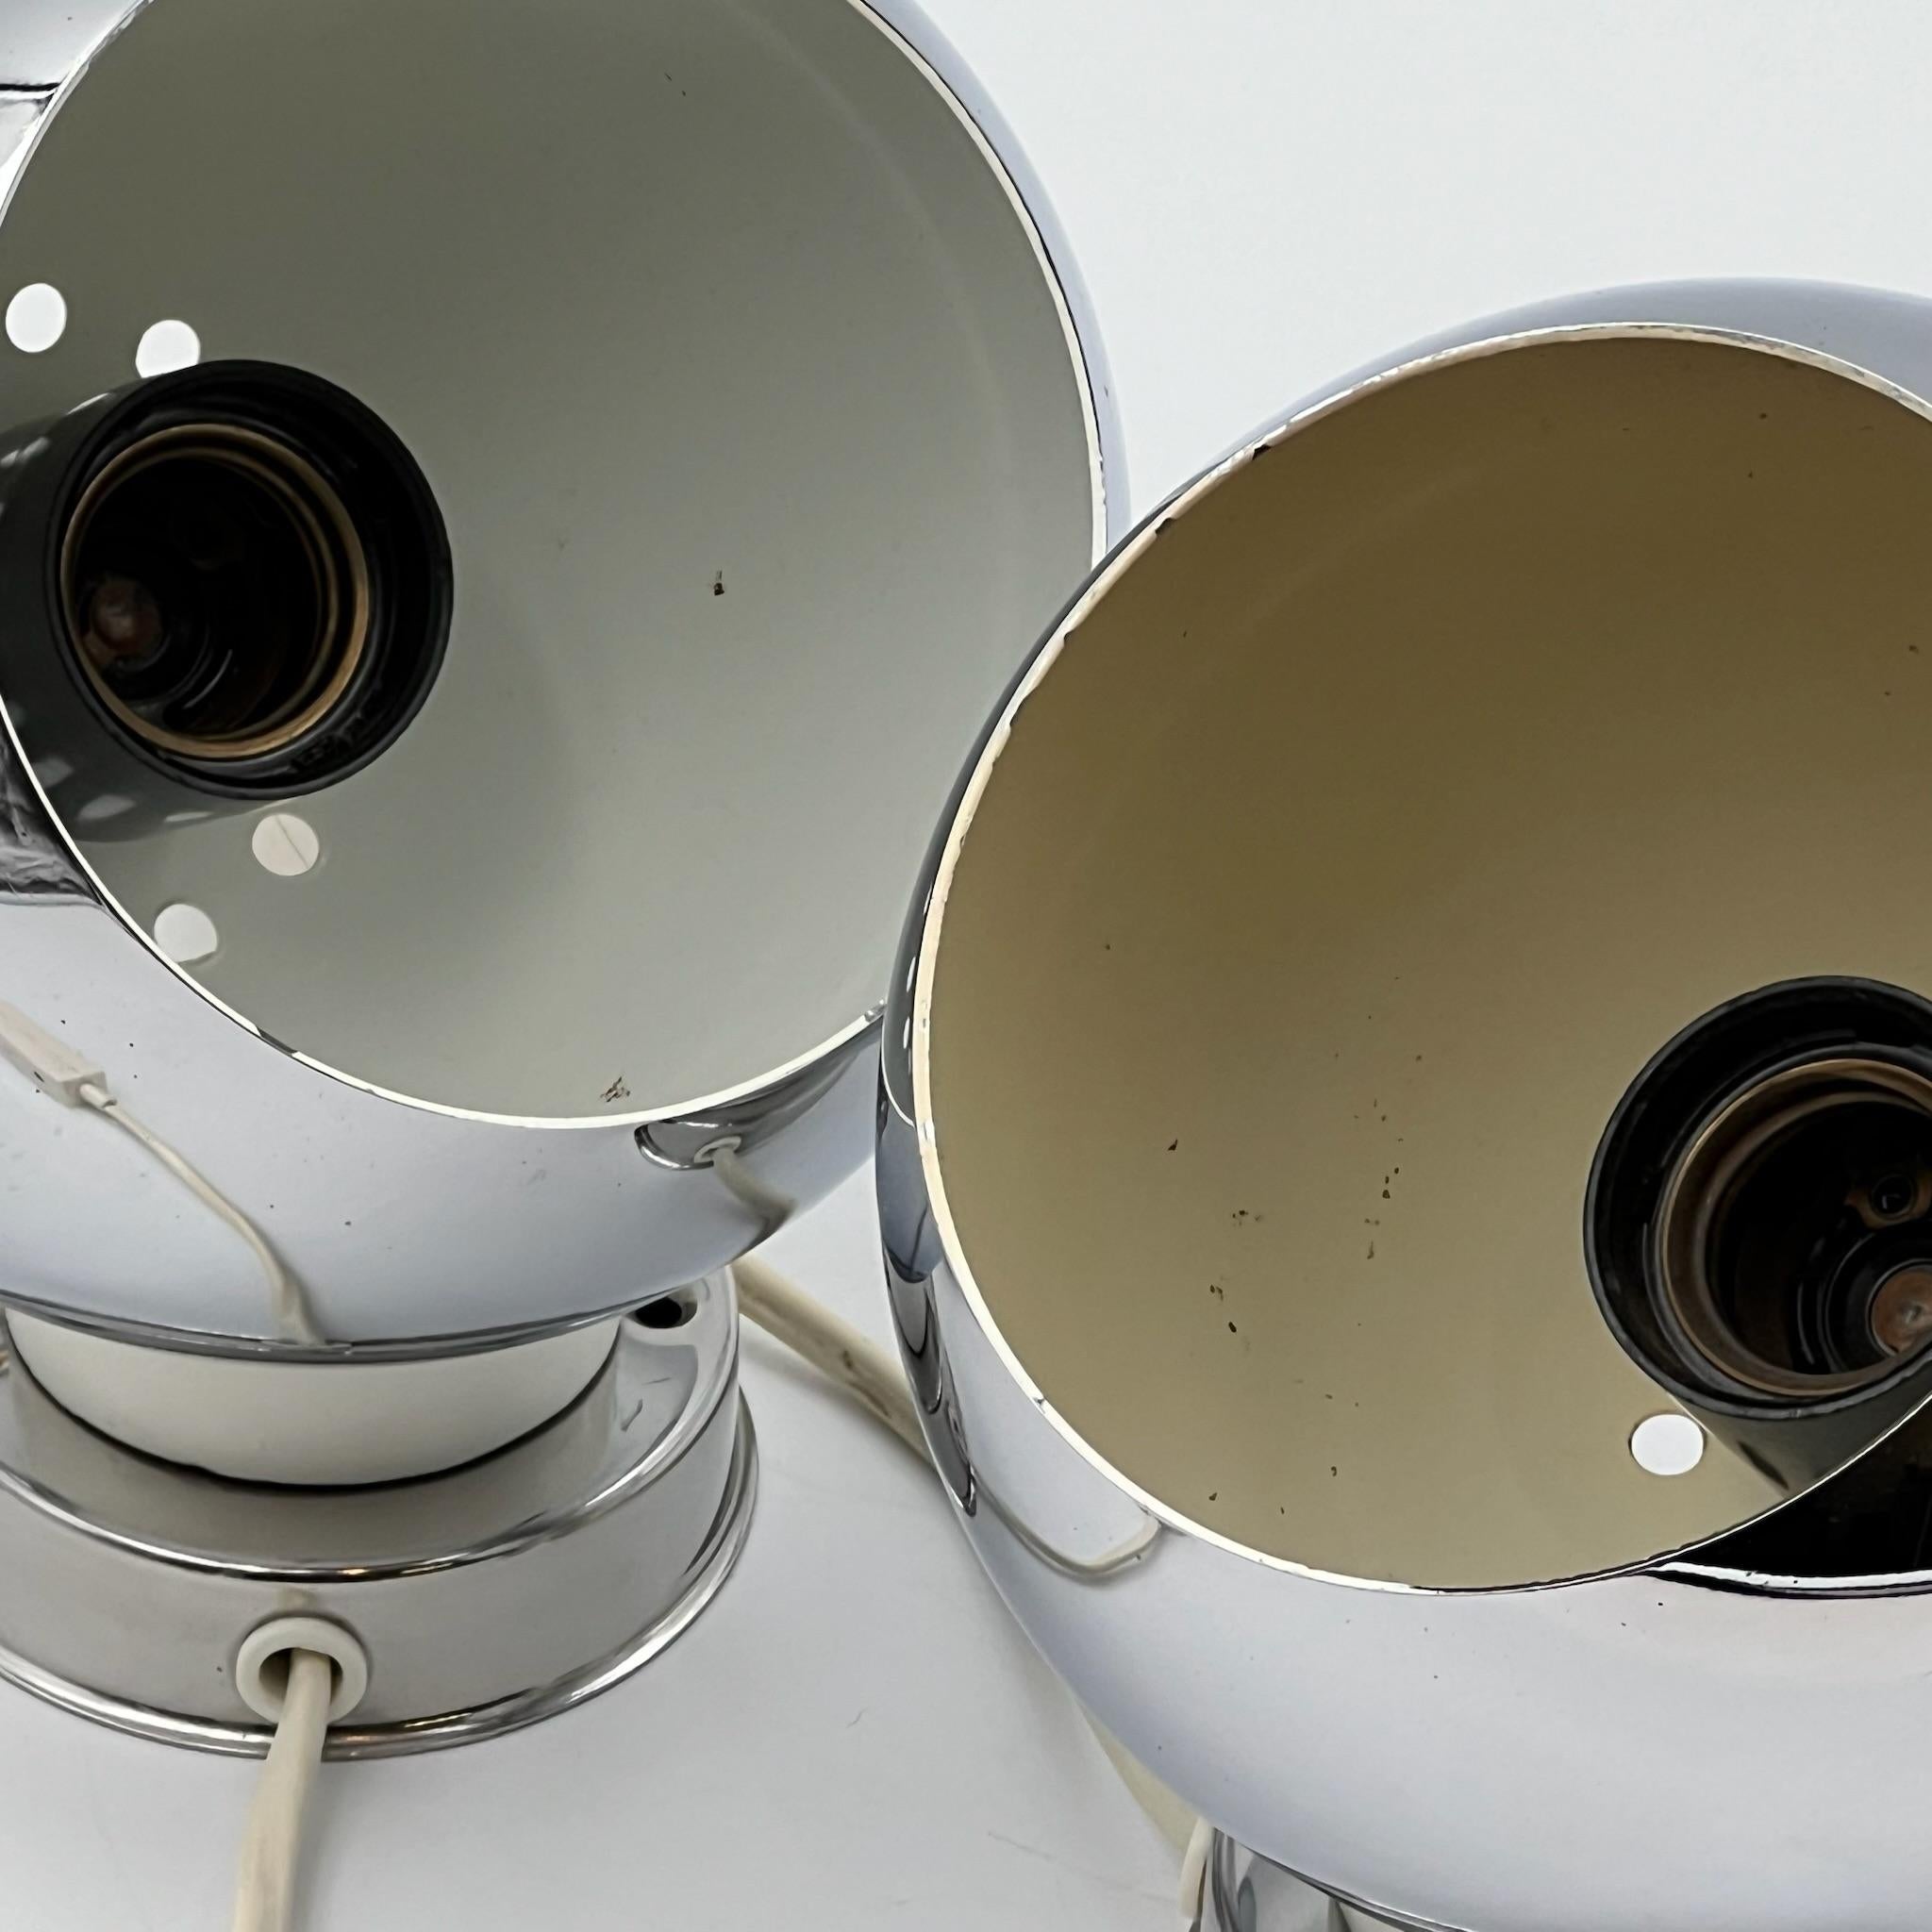 Iconic Reggiani 'Eyeball' Lamps 60s - Pair of Vintage Masterpieces - Set of 2 For Sale 1